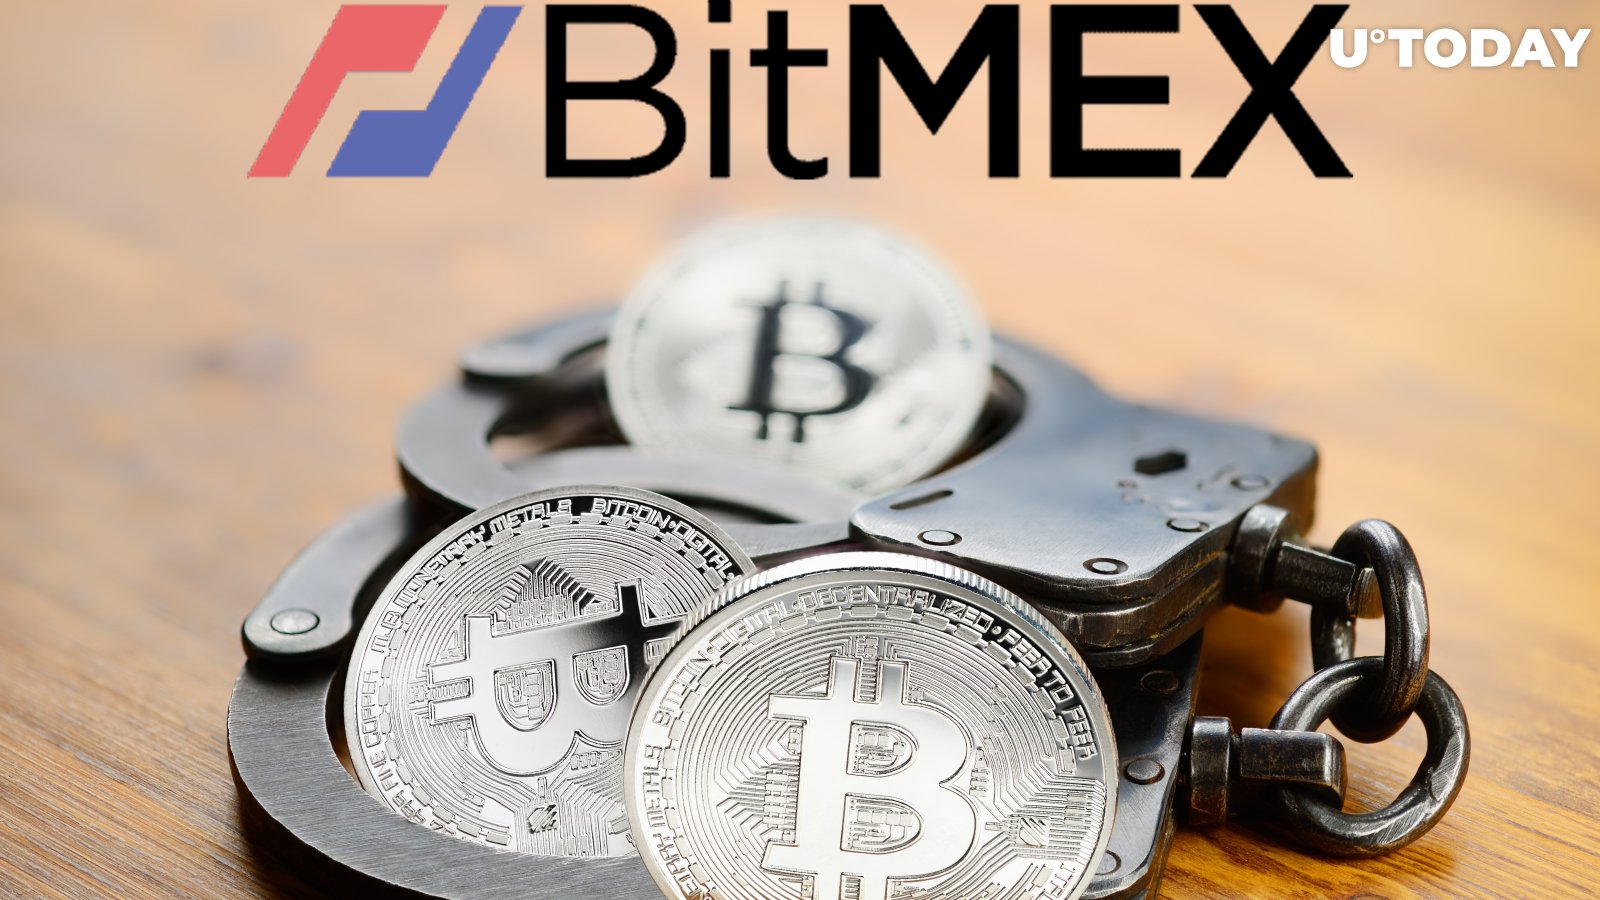 Here's Why BitMEX Crackdown Is Good for Bitcoin